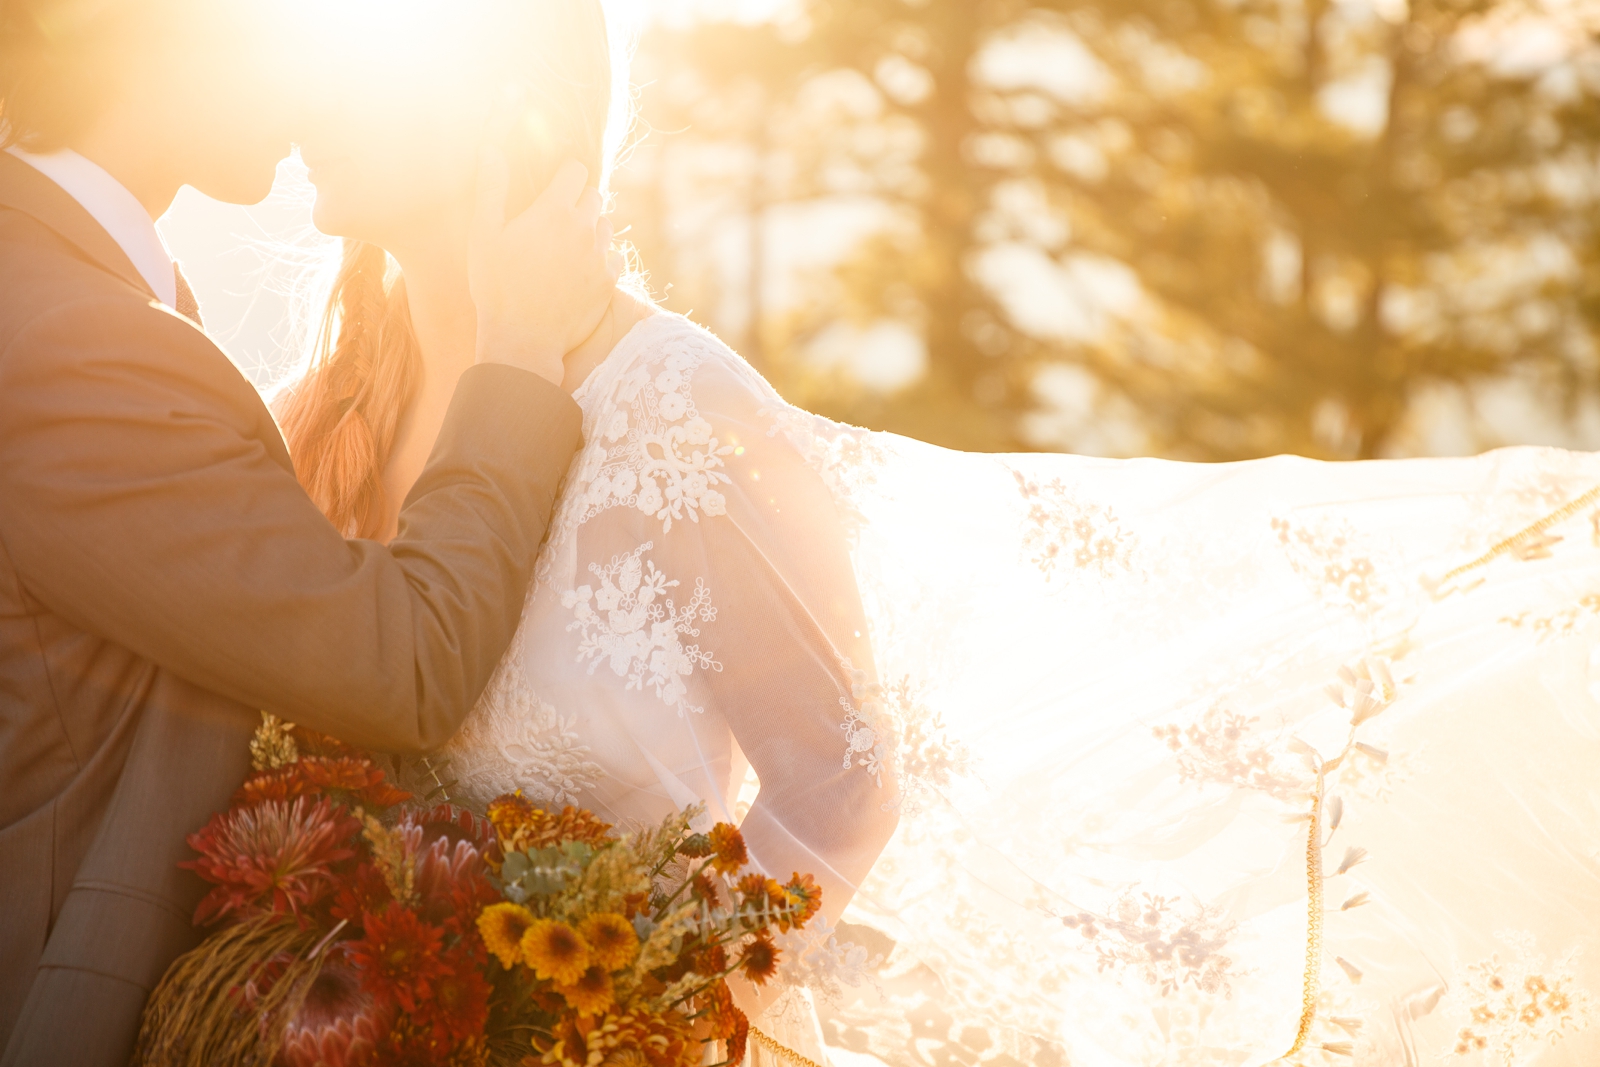 Dreamy golden light at this Yosemite Glacier Point elopement.